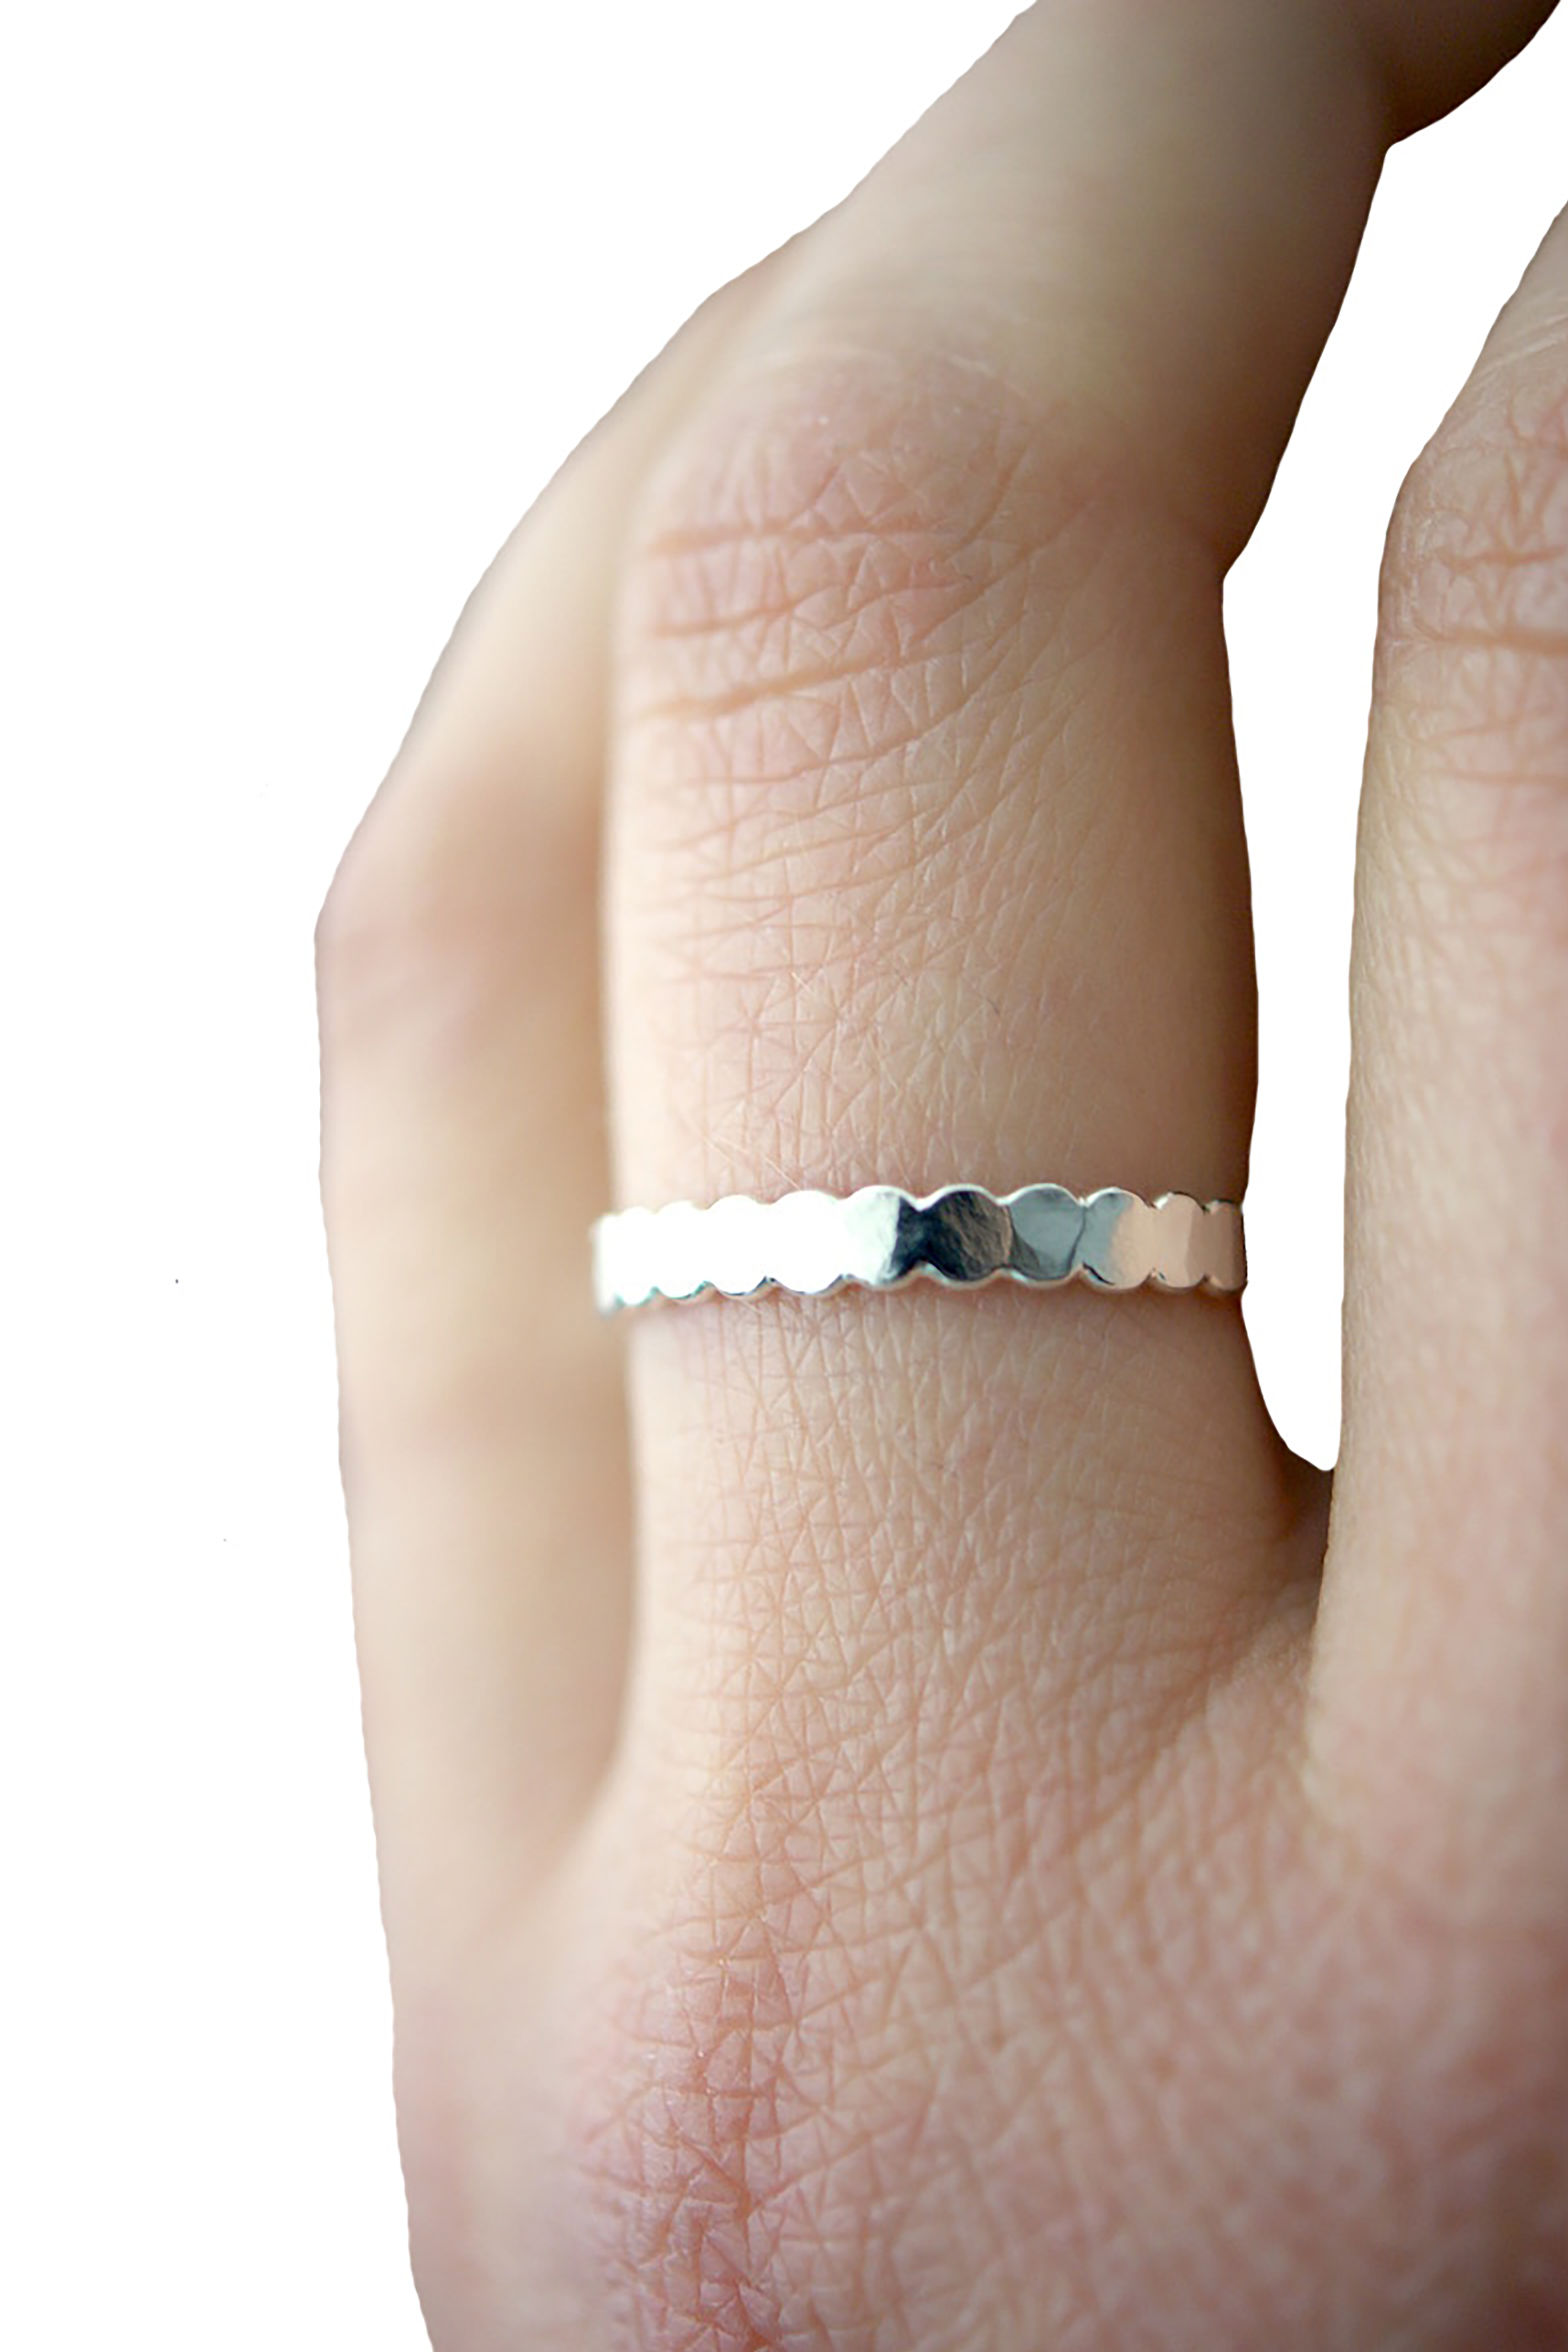 Beaded Ring in Sterling Silver